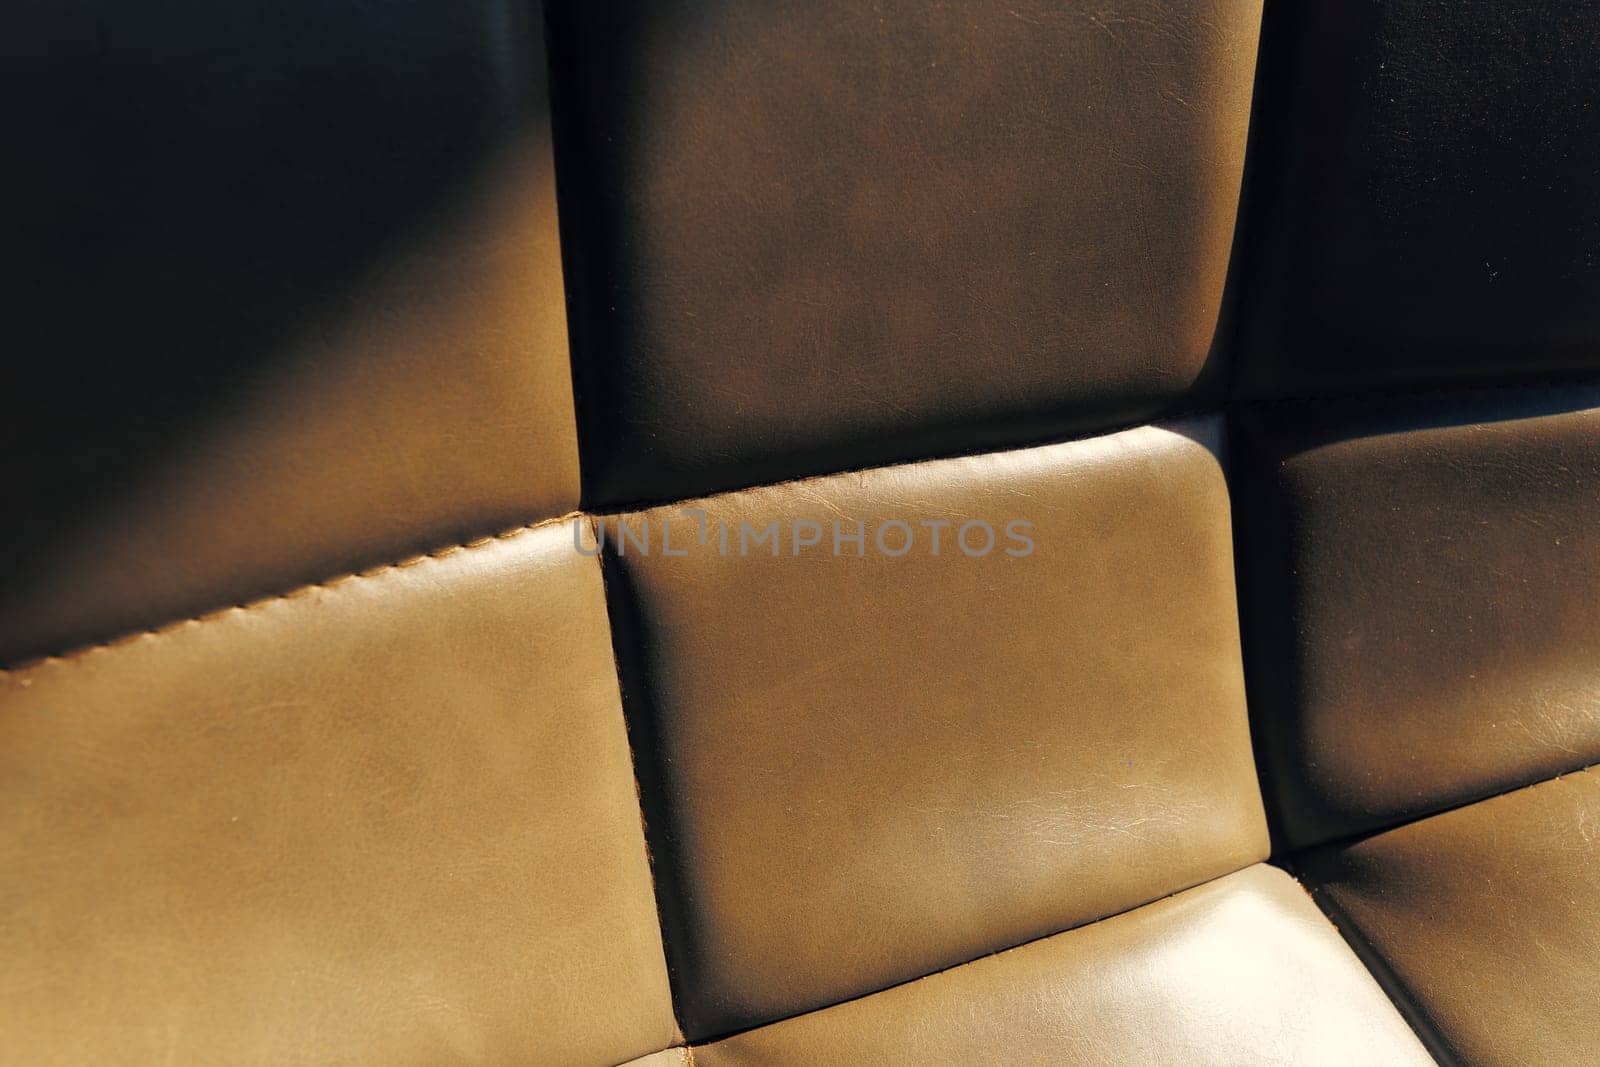 leather furniture upholstery with stitching stitches. High quality photo